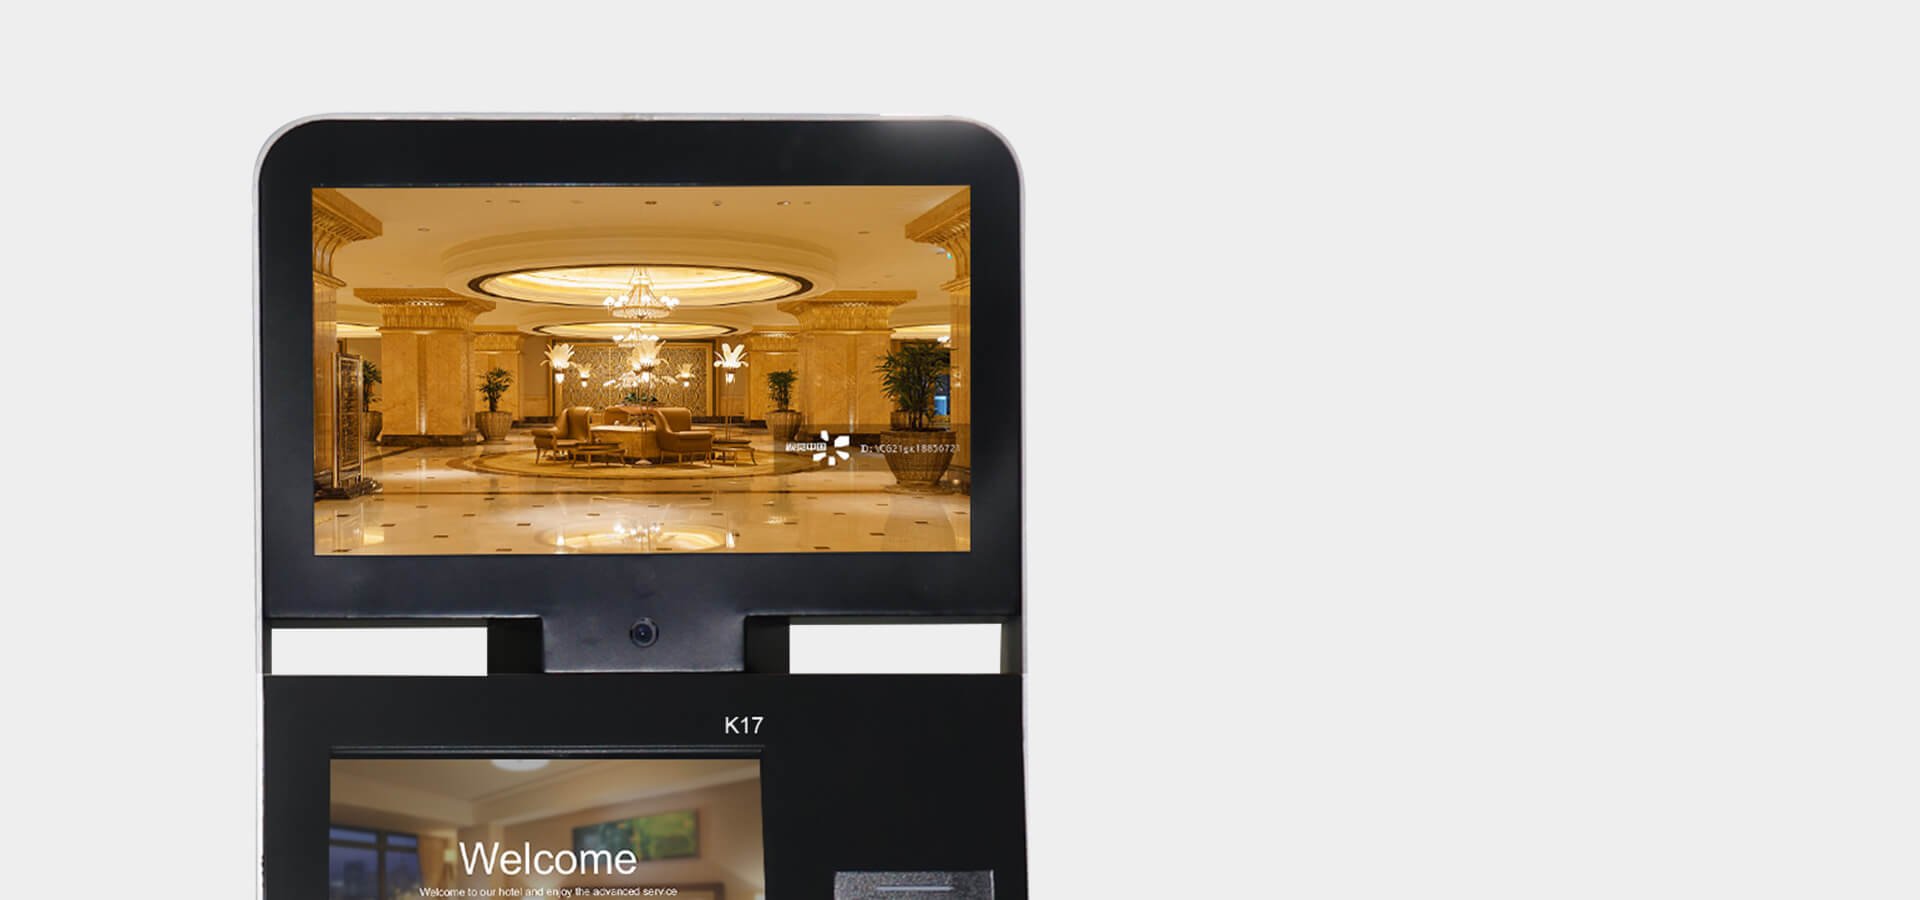 dual screen hotel kiosk terminal with advertisement